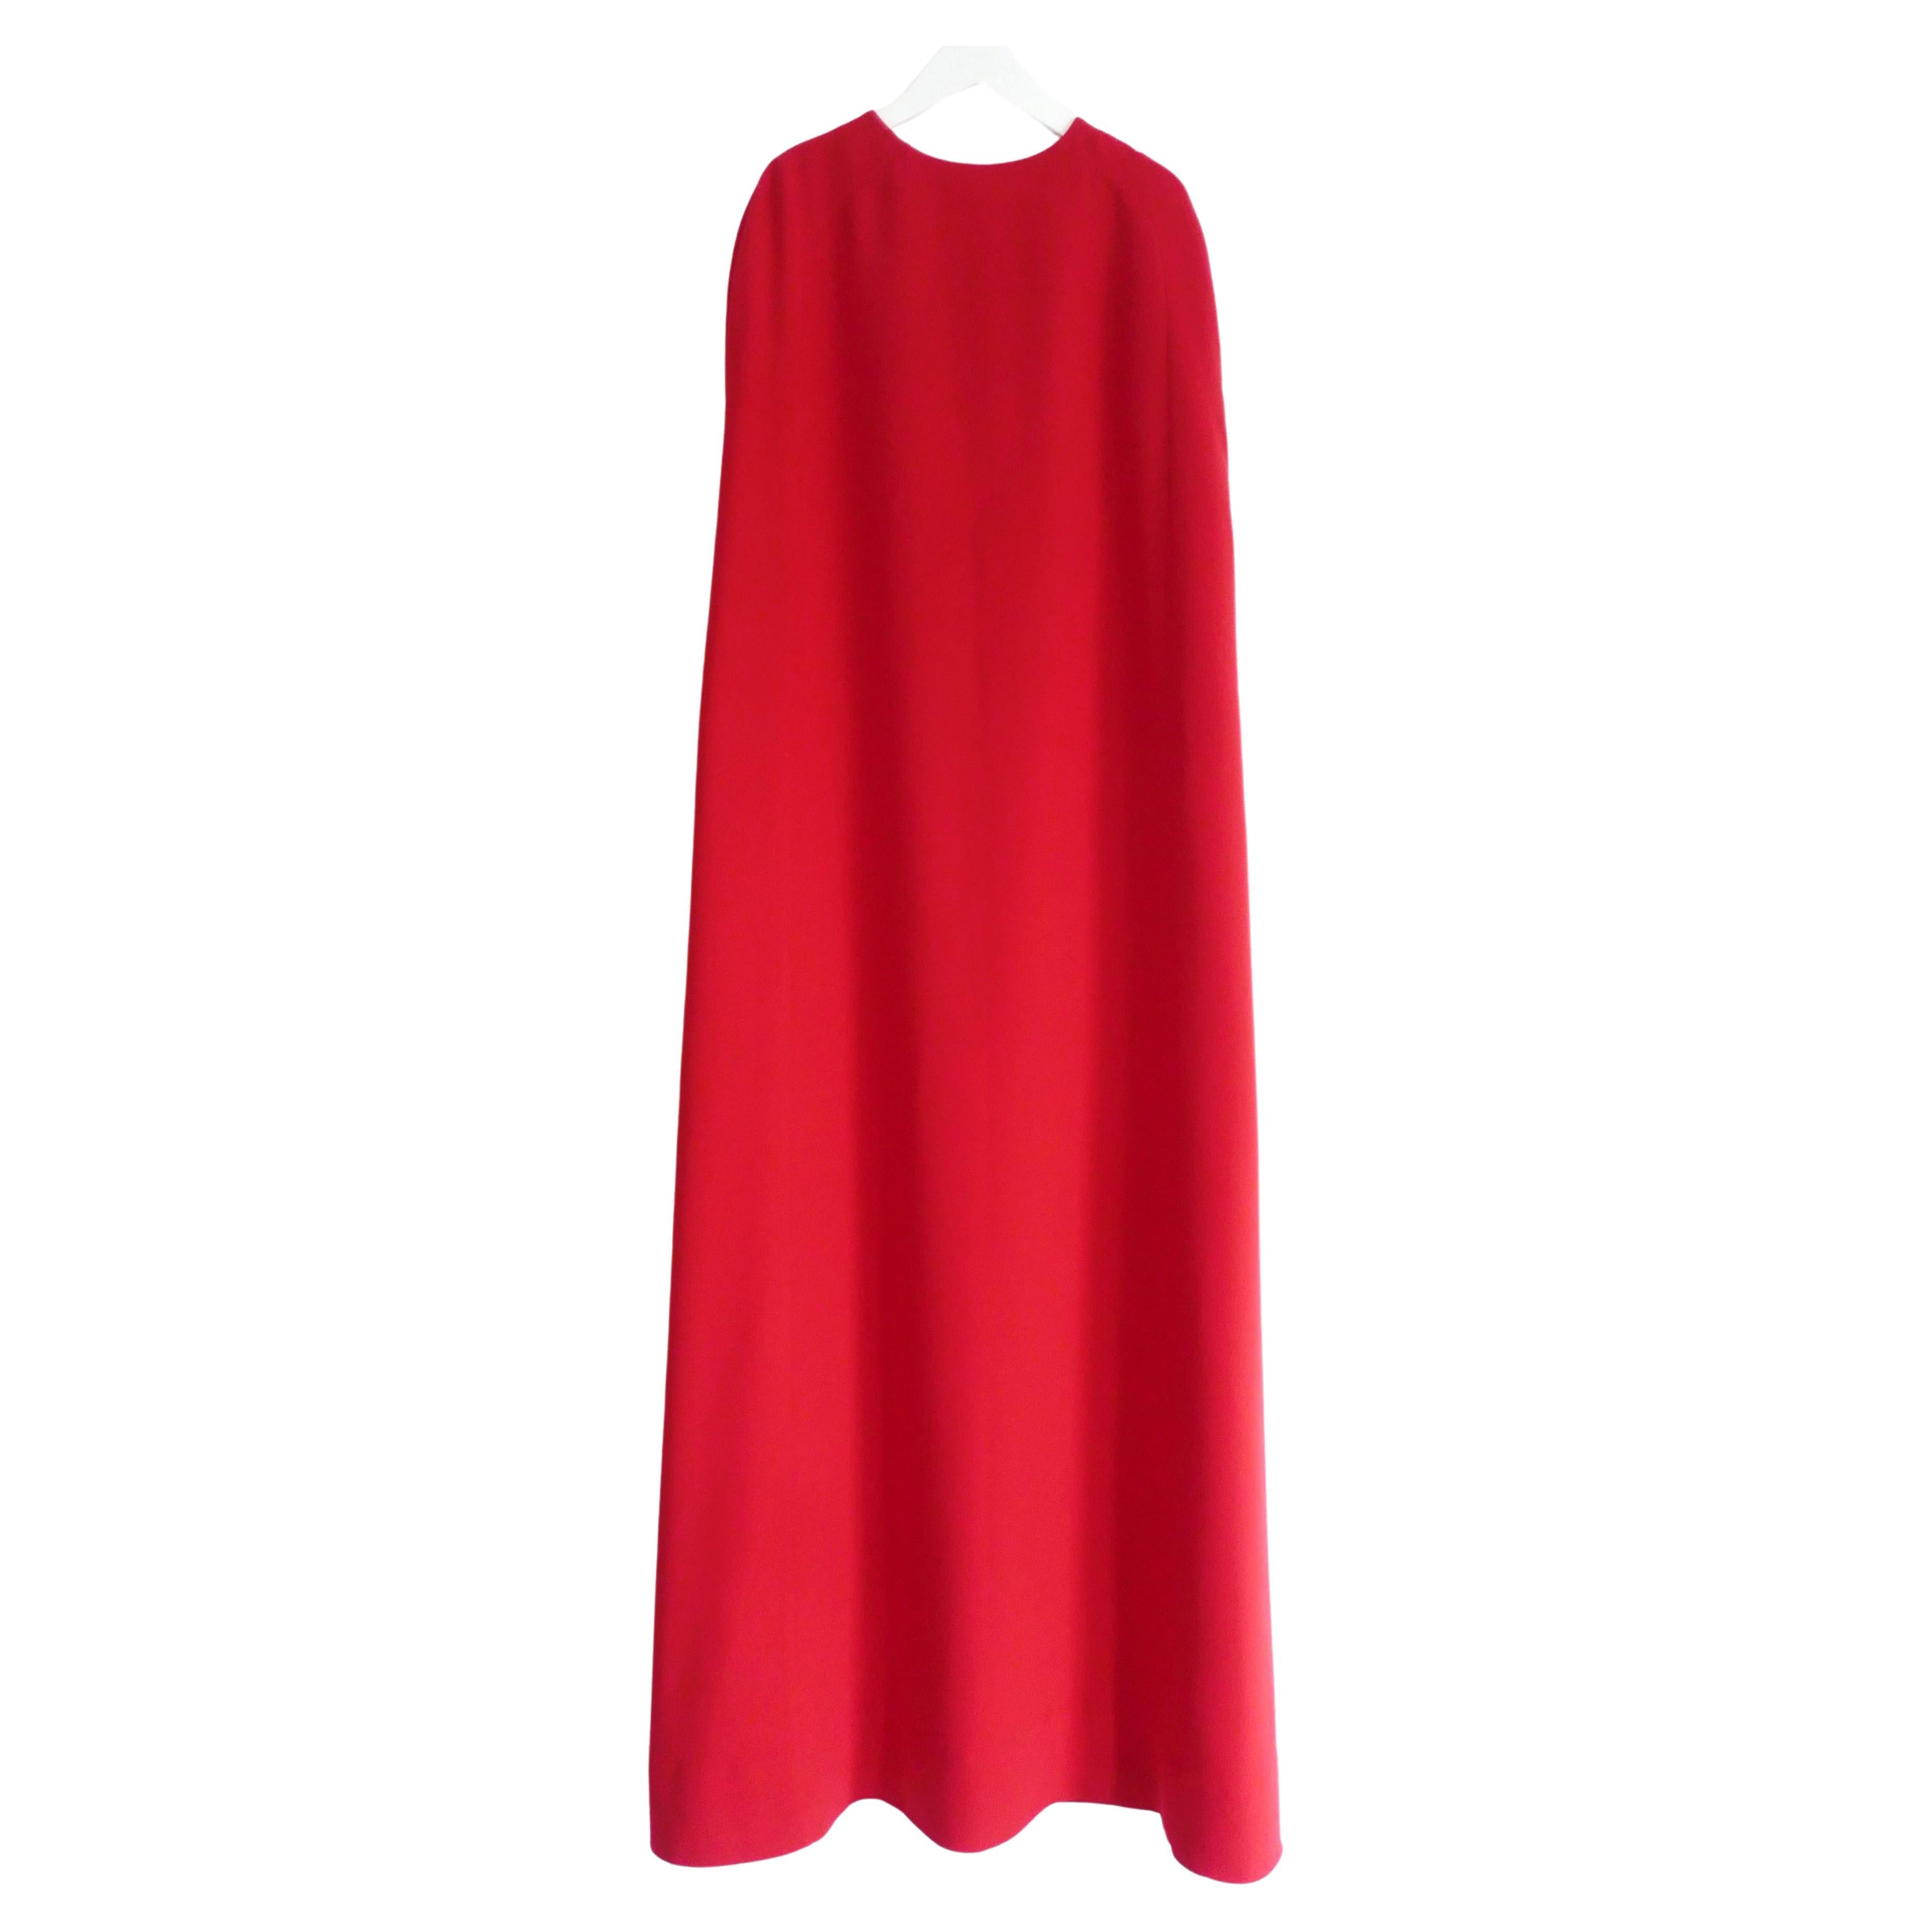  Valentino Pre-Fall 2014 Red Cape Gown Dress